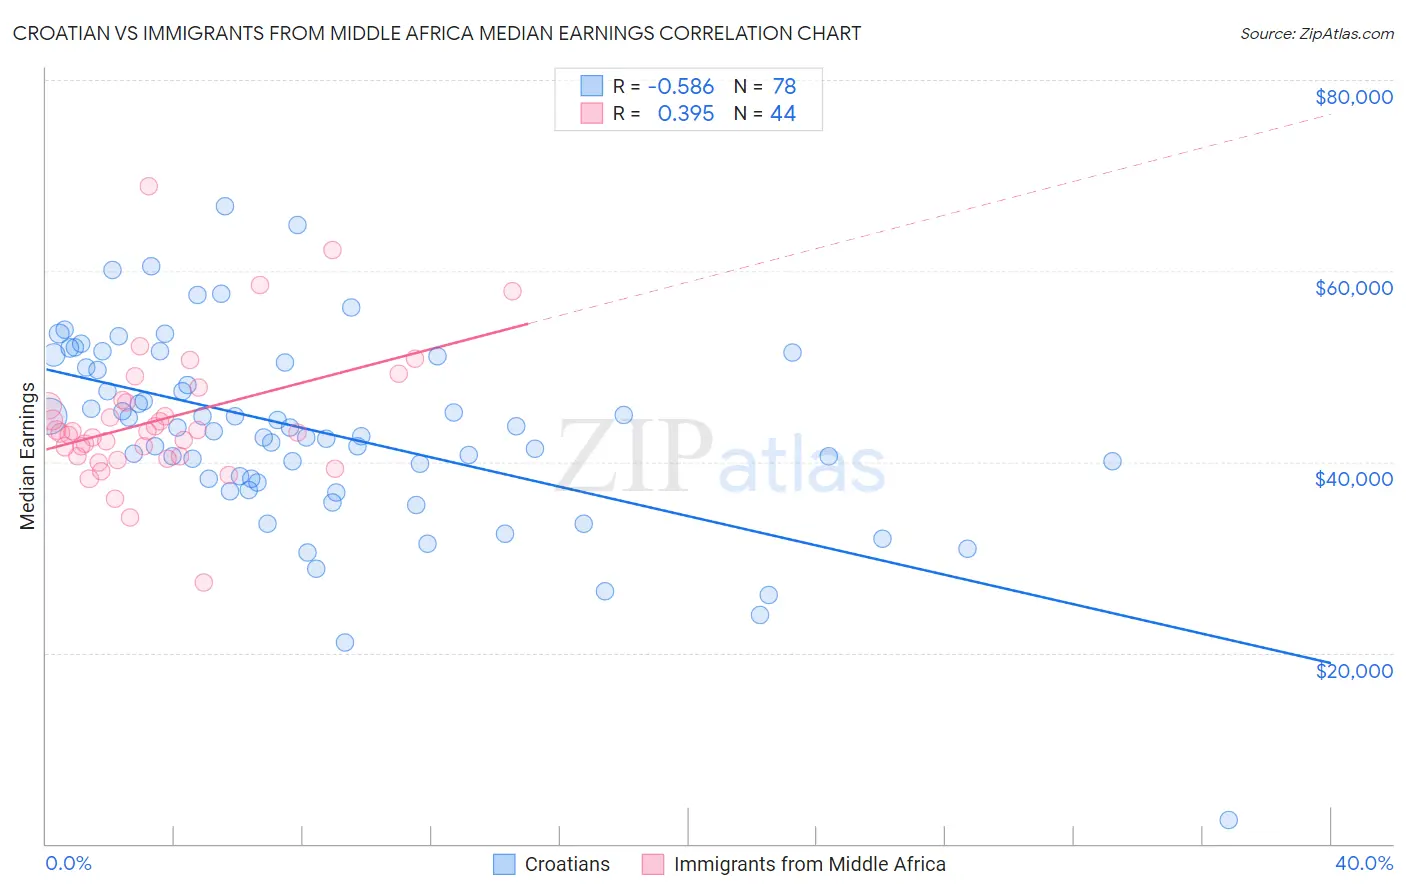 Croatian vs Immigrants from Middle Africa Median Earnings